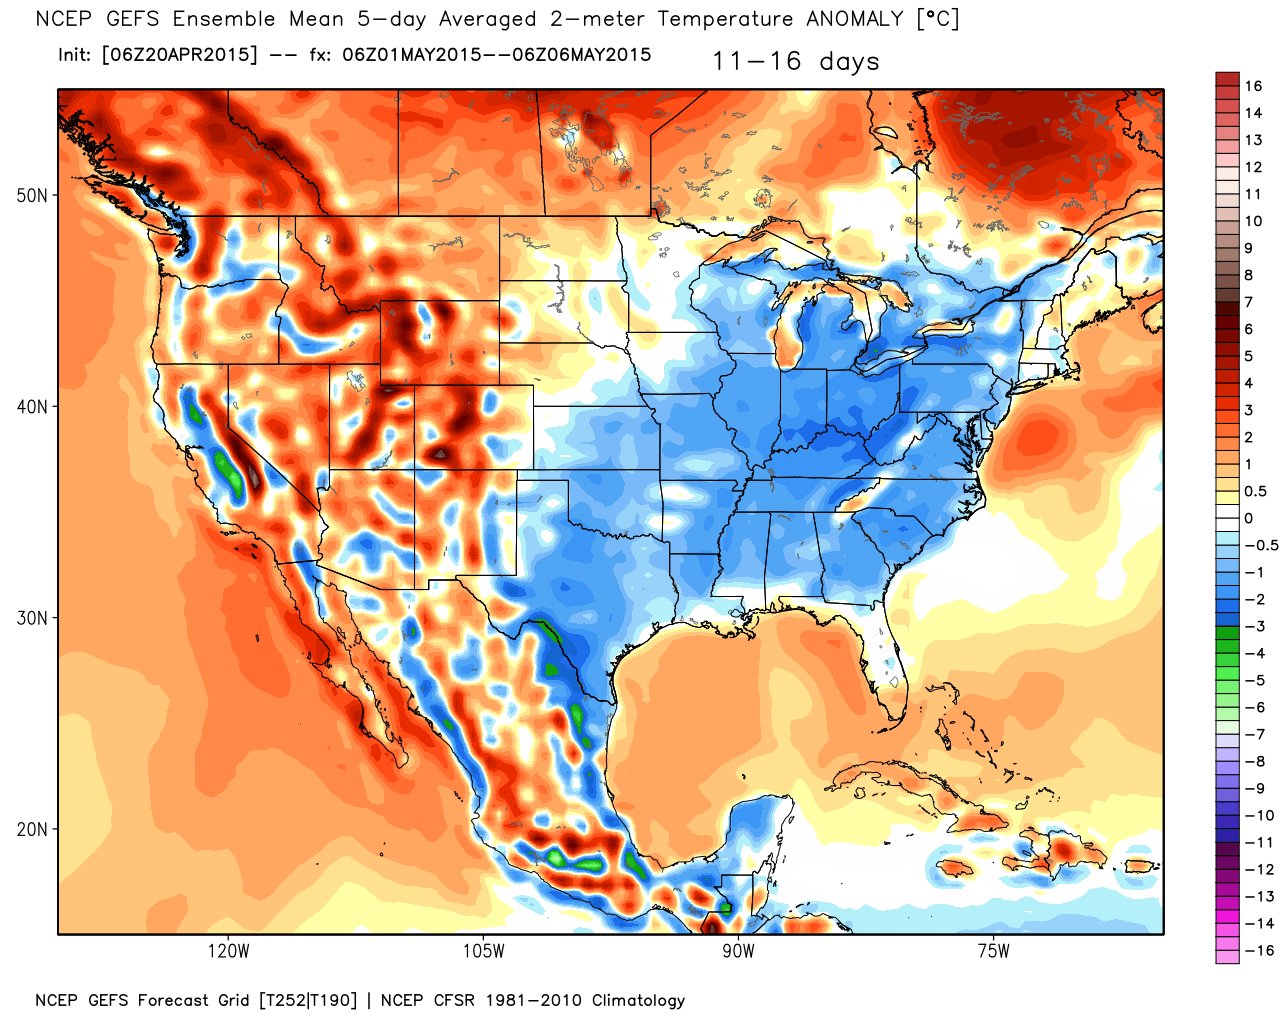 May 1 through May 6 Temperature Anomaly from Average